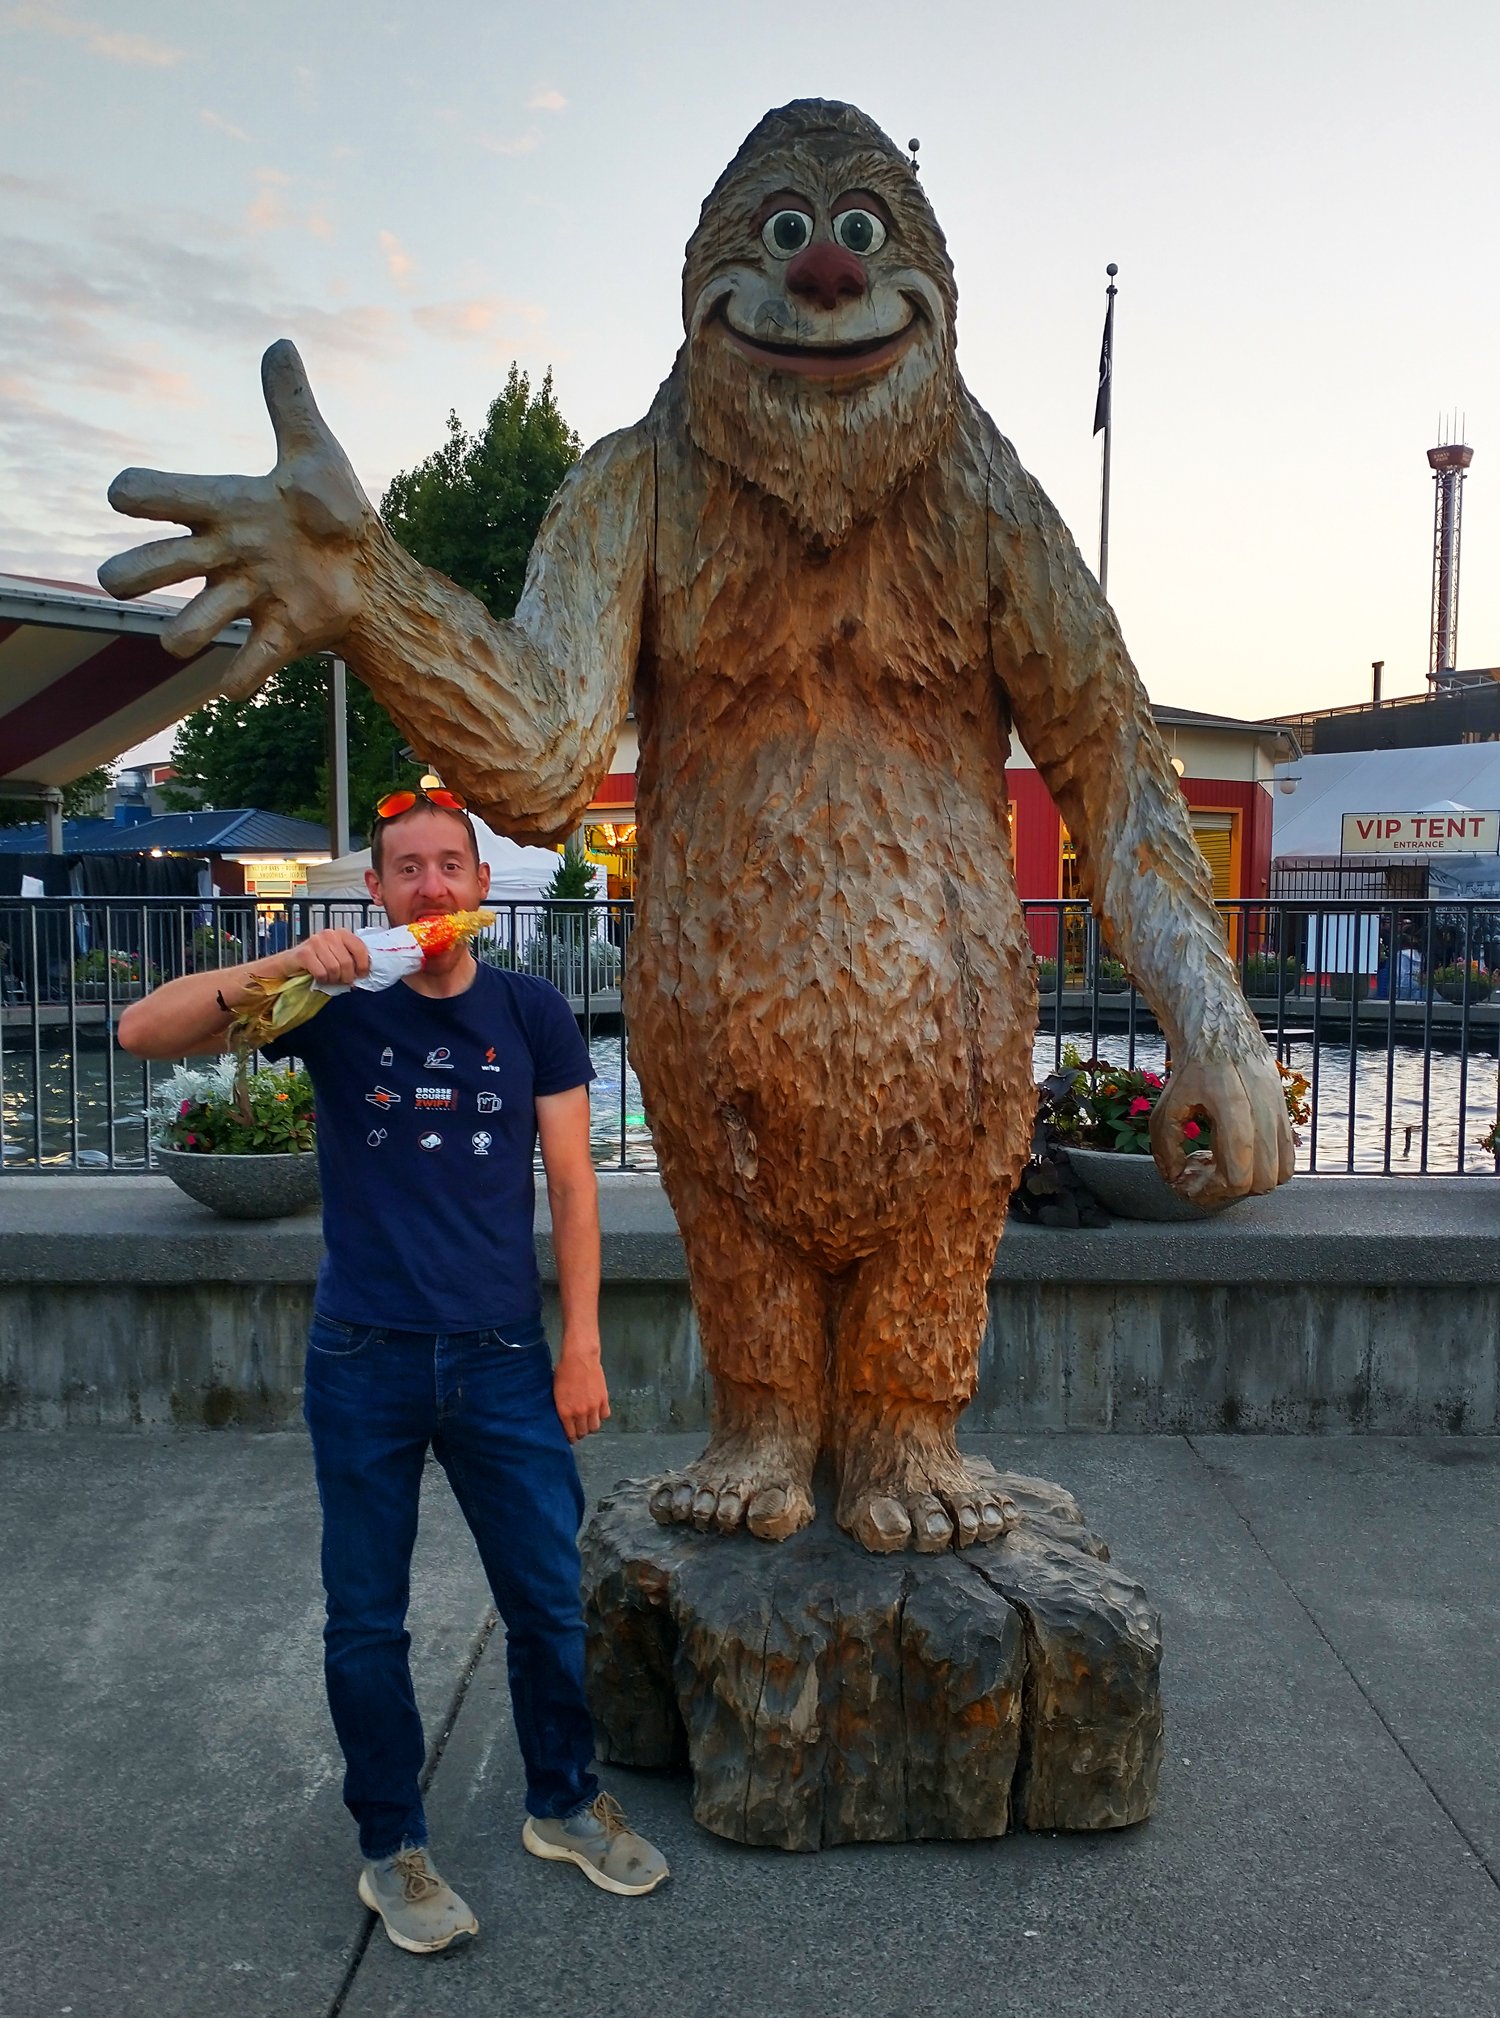 Maybe next year I do a Sasquatch statue tour. Damn I'll be gone for a decade if I do that.